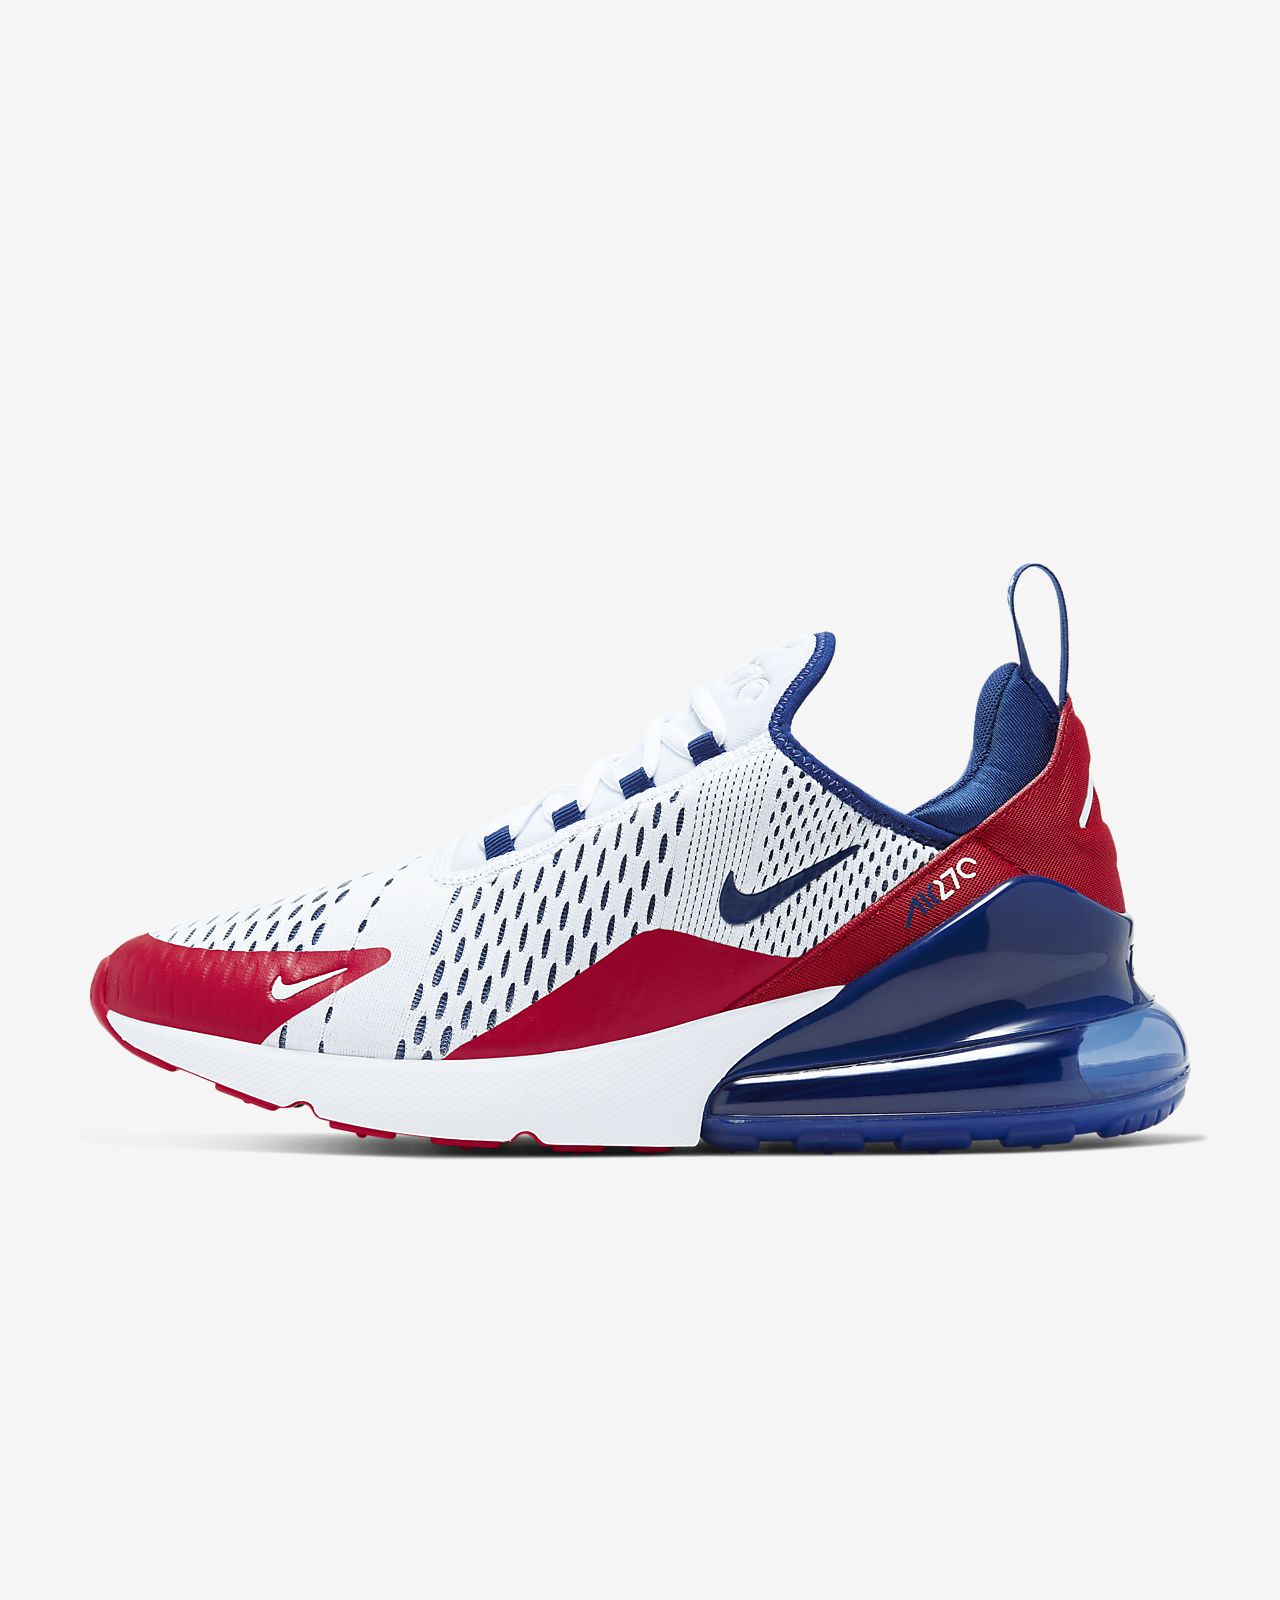 nike 270 men's white and red